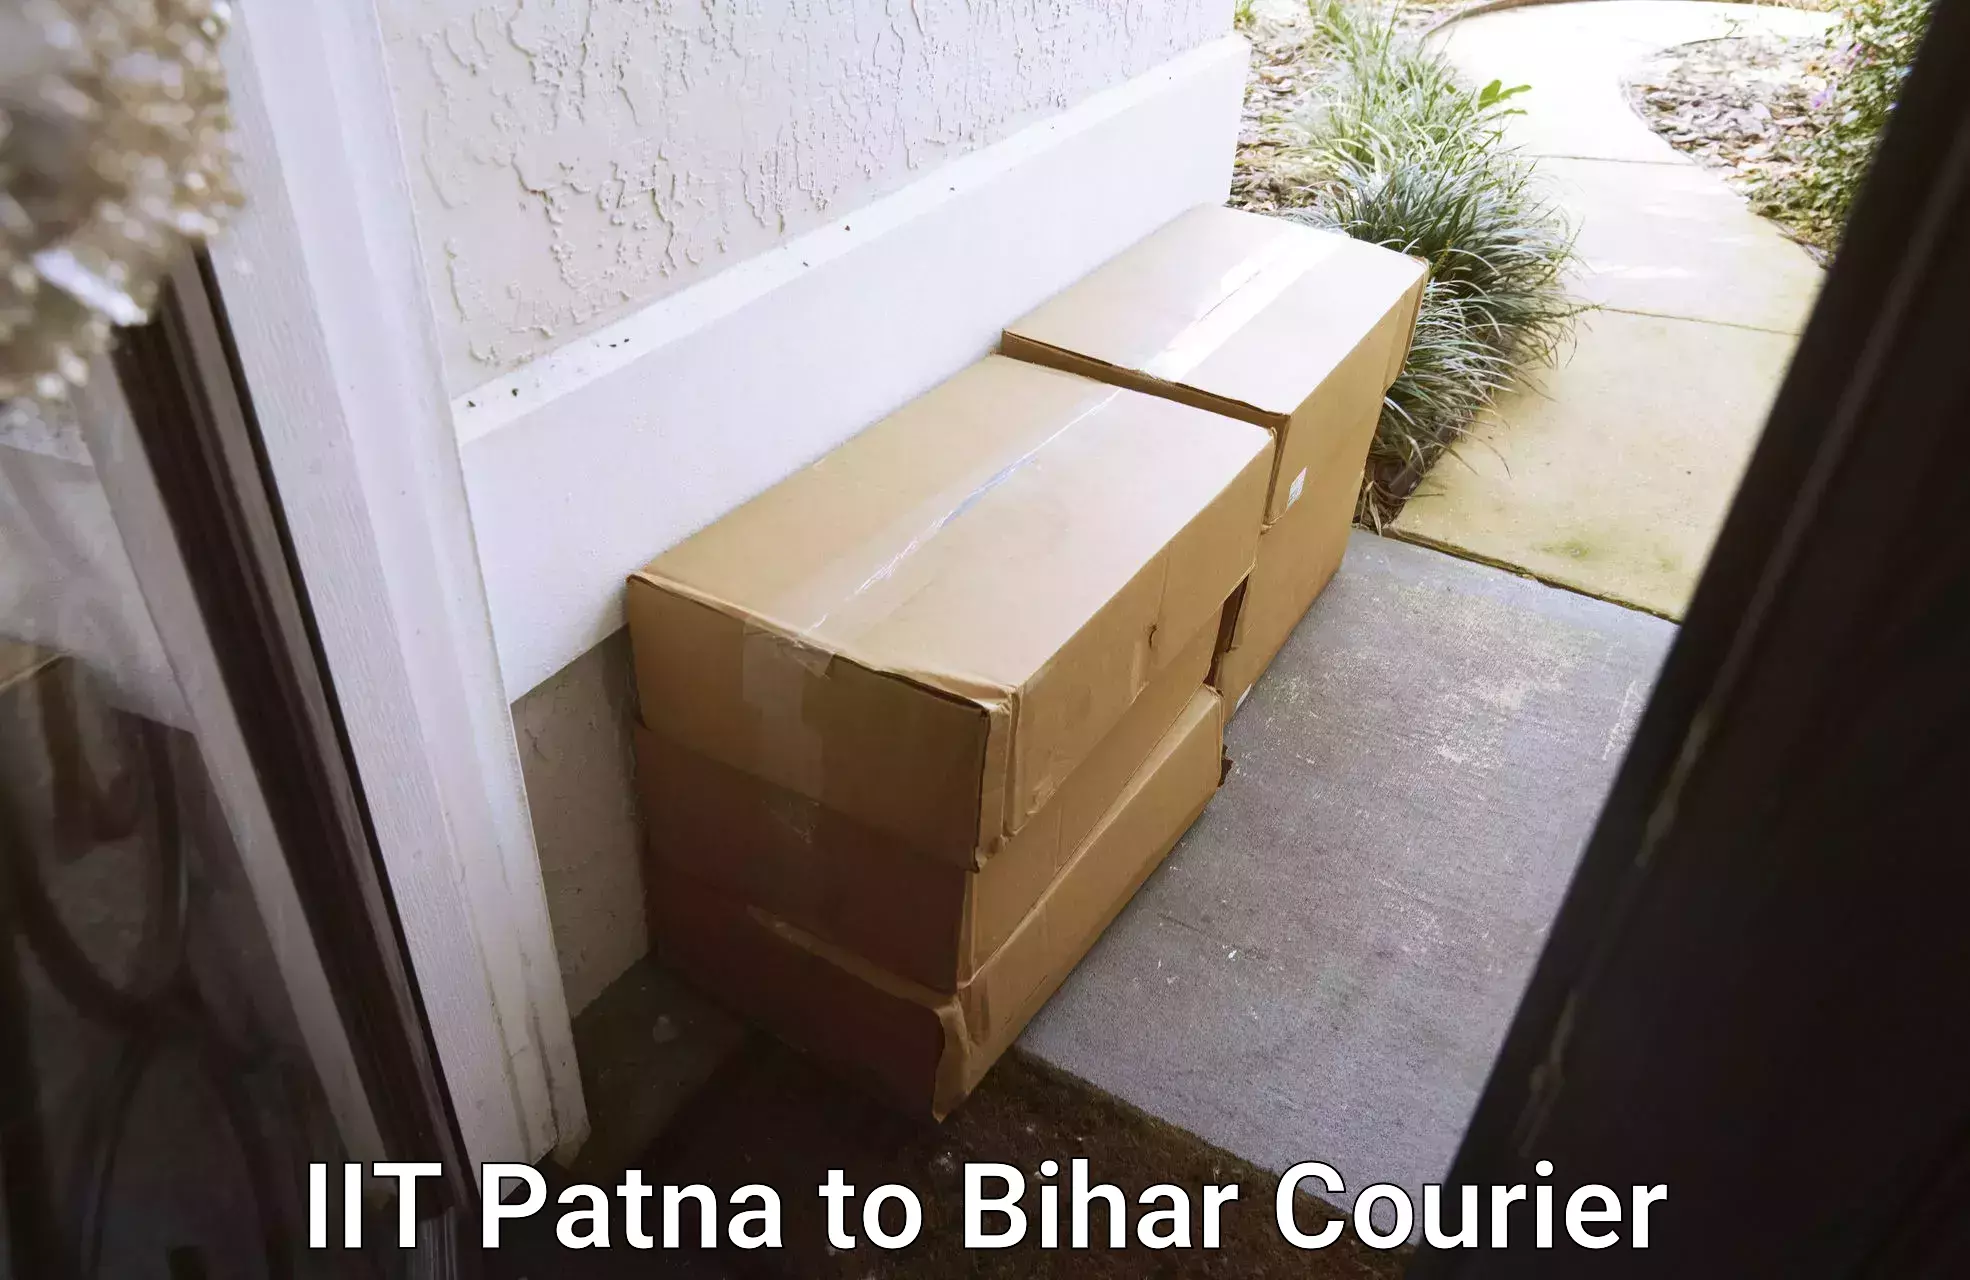 Residential moving services in IIT Patna to Patna